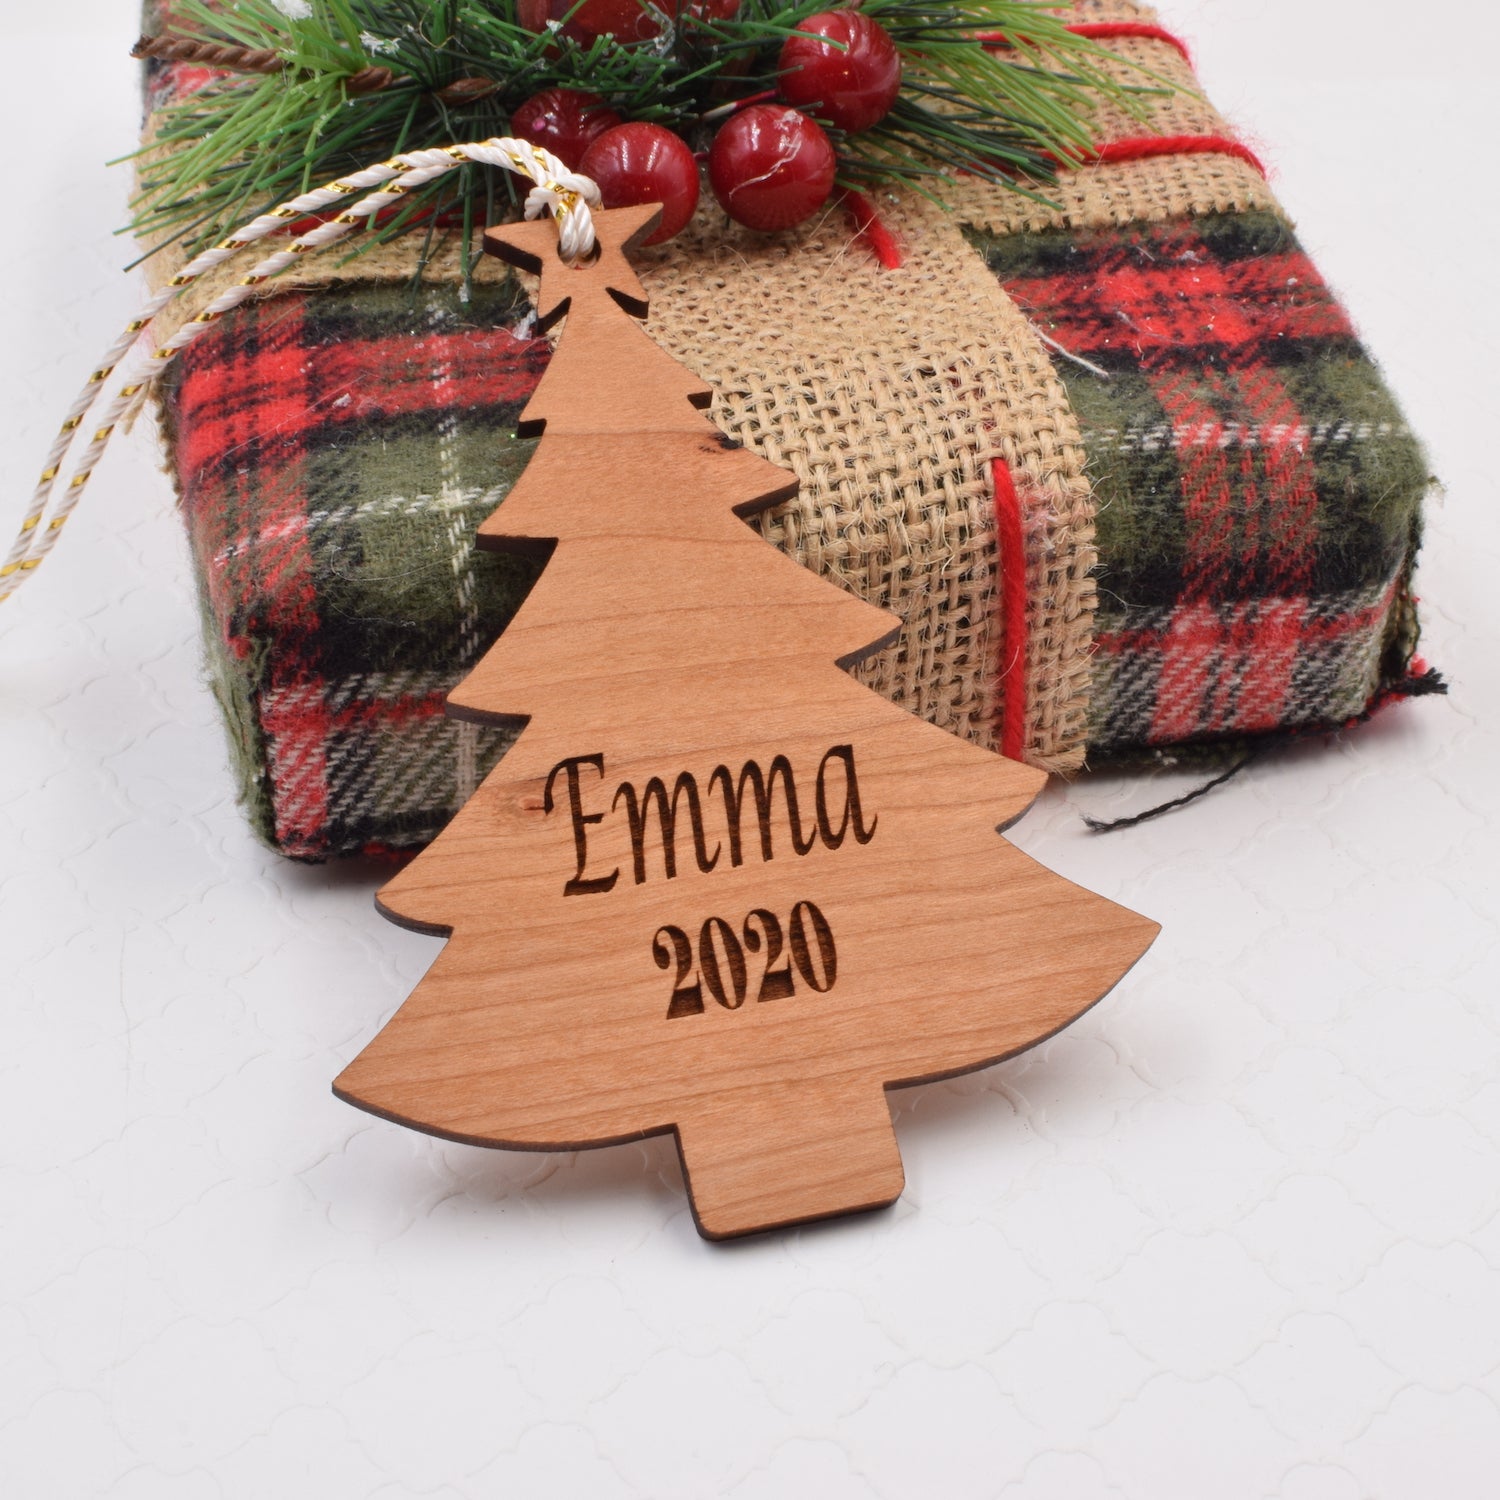 Personalized Wood Ornament - My First Christmas Ornament, 61013